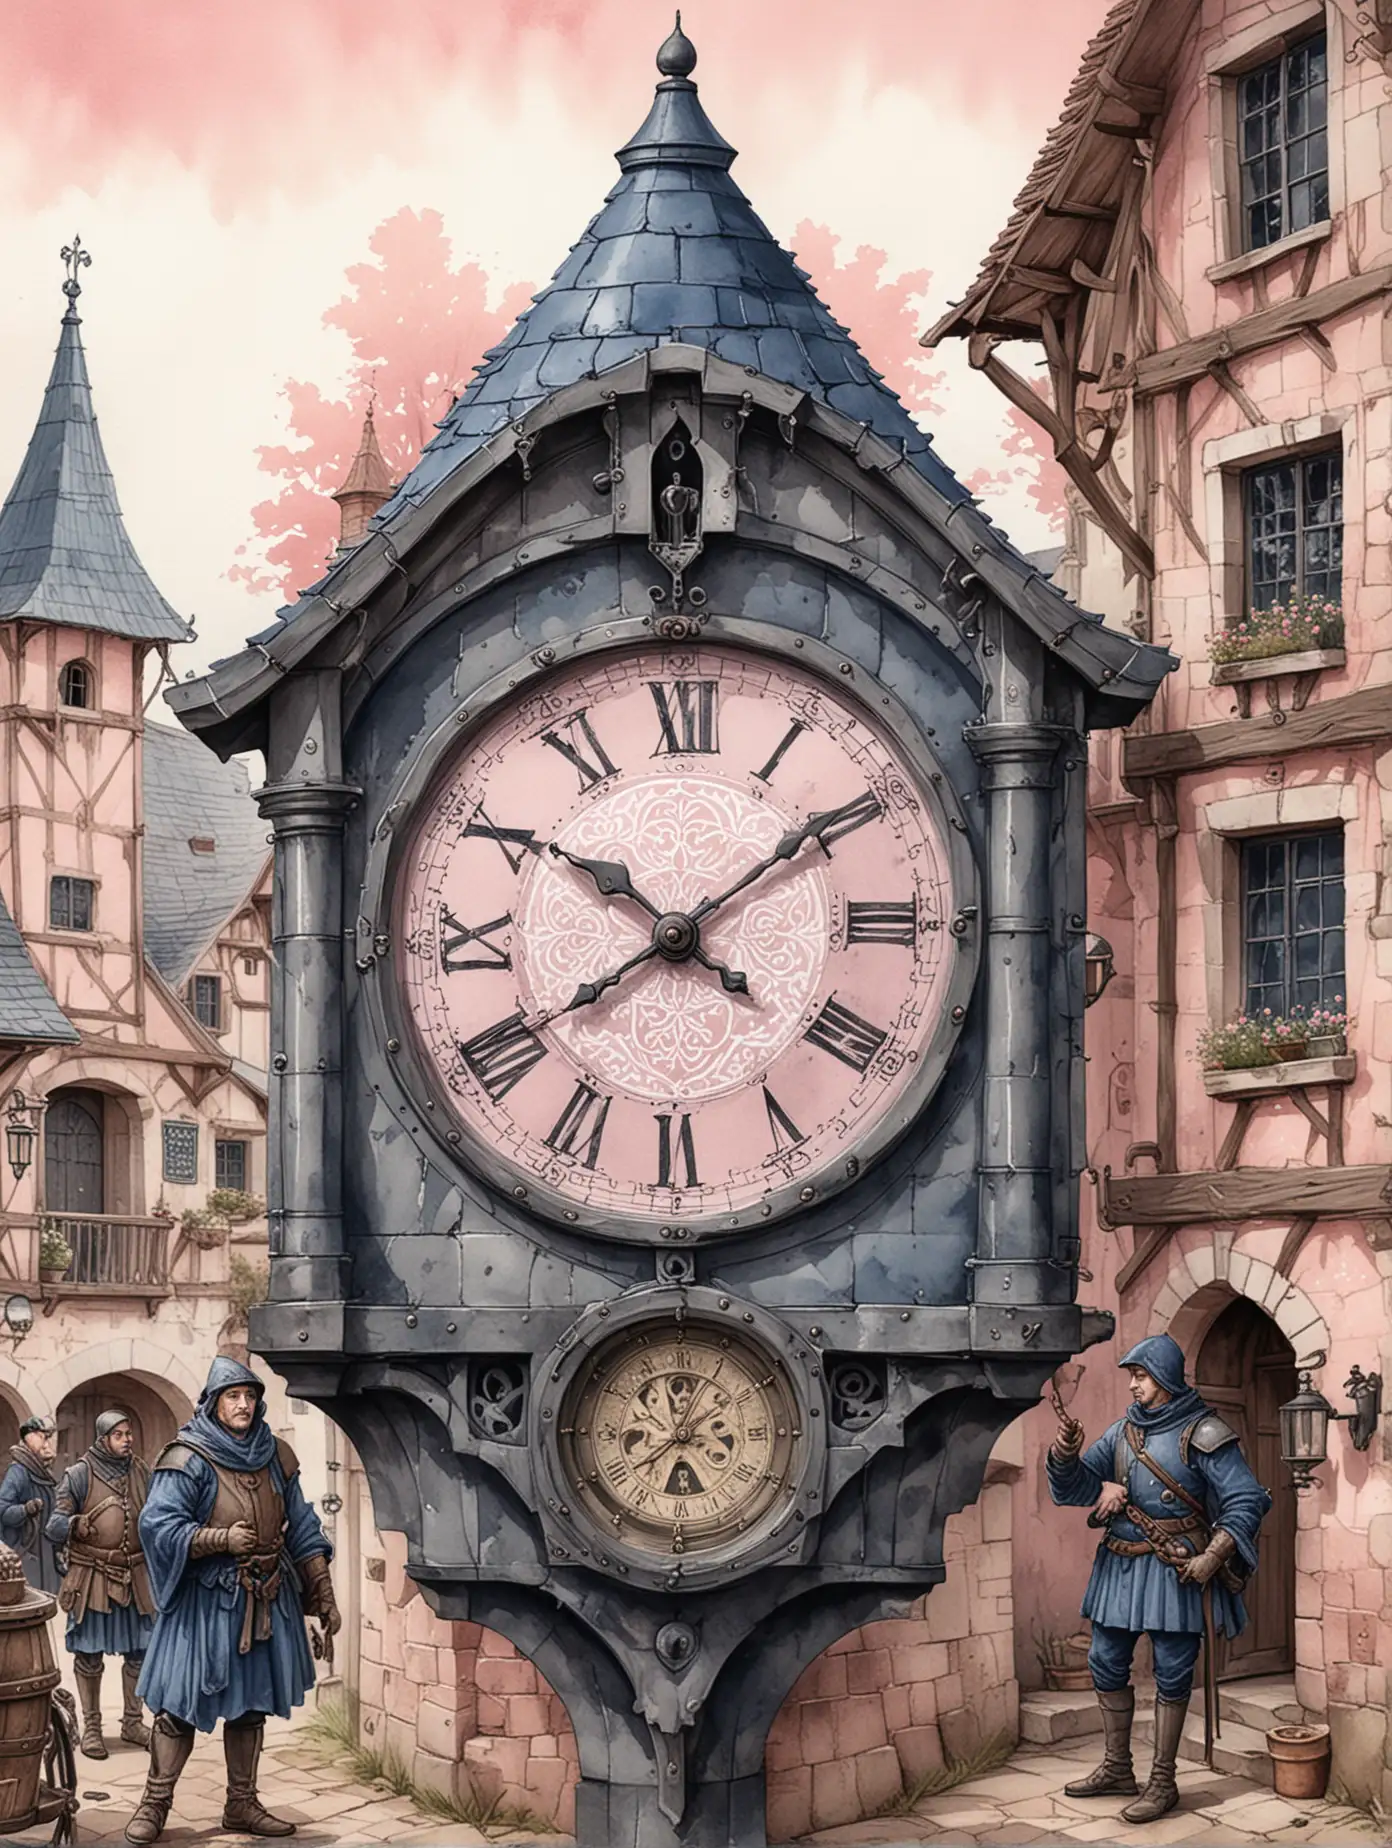 Digital illustration, medieval illustration, medieval steampunk illustration, medieval clock,  medieval villagers, 300dpi, Graphic Art, in a pale pink and navy blue watercolour and ink wash